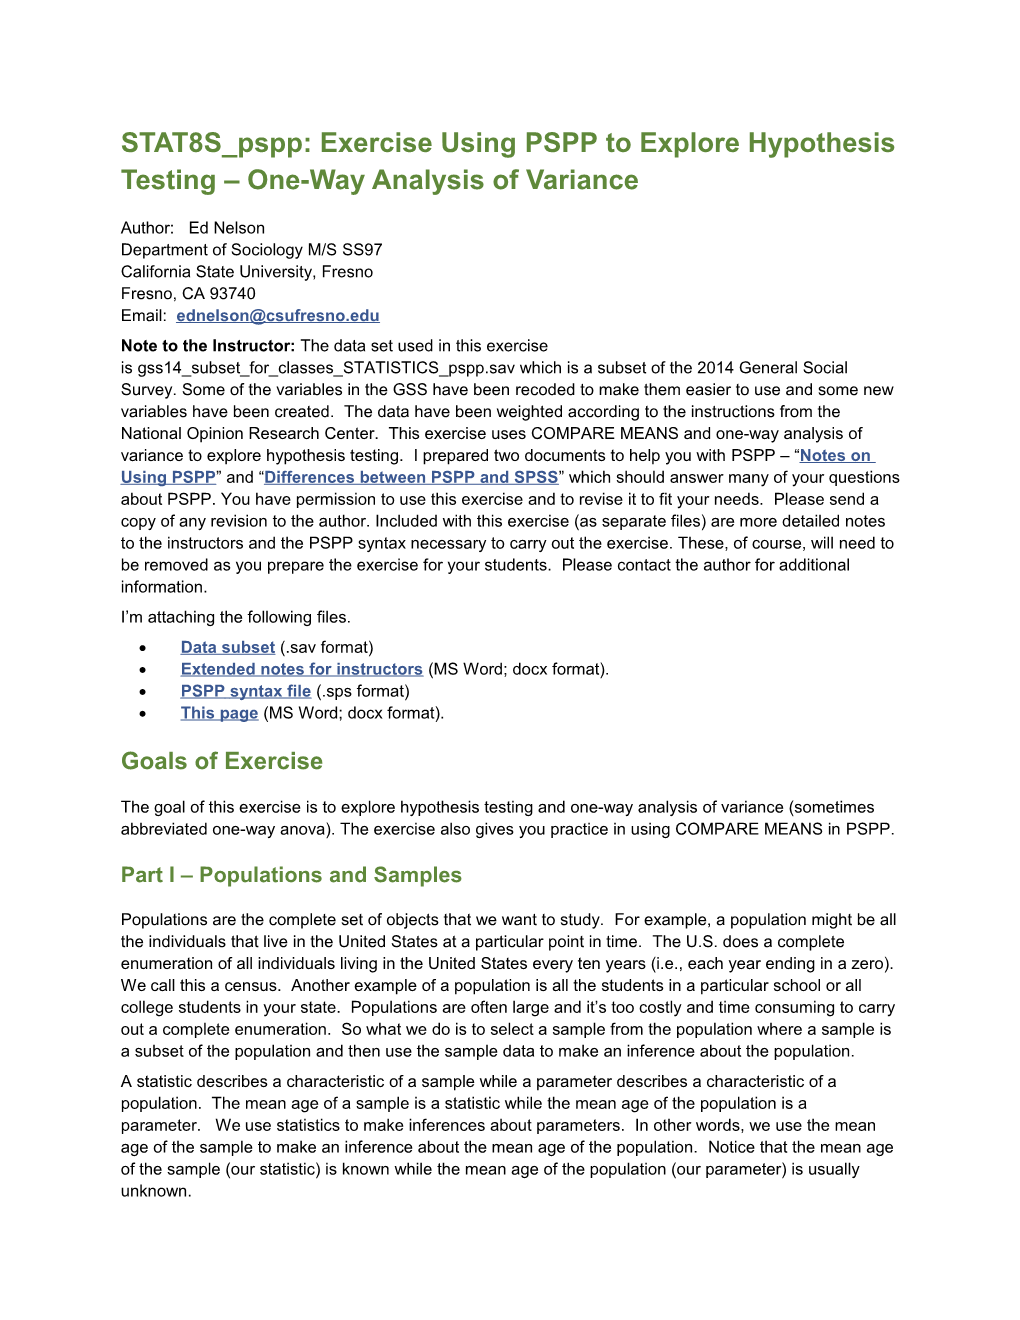 STAT8S Pspp: Exercise Usingpsppto Explore Hypothesis Testing One-Way Analysis of Variance